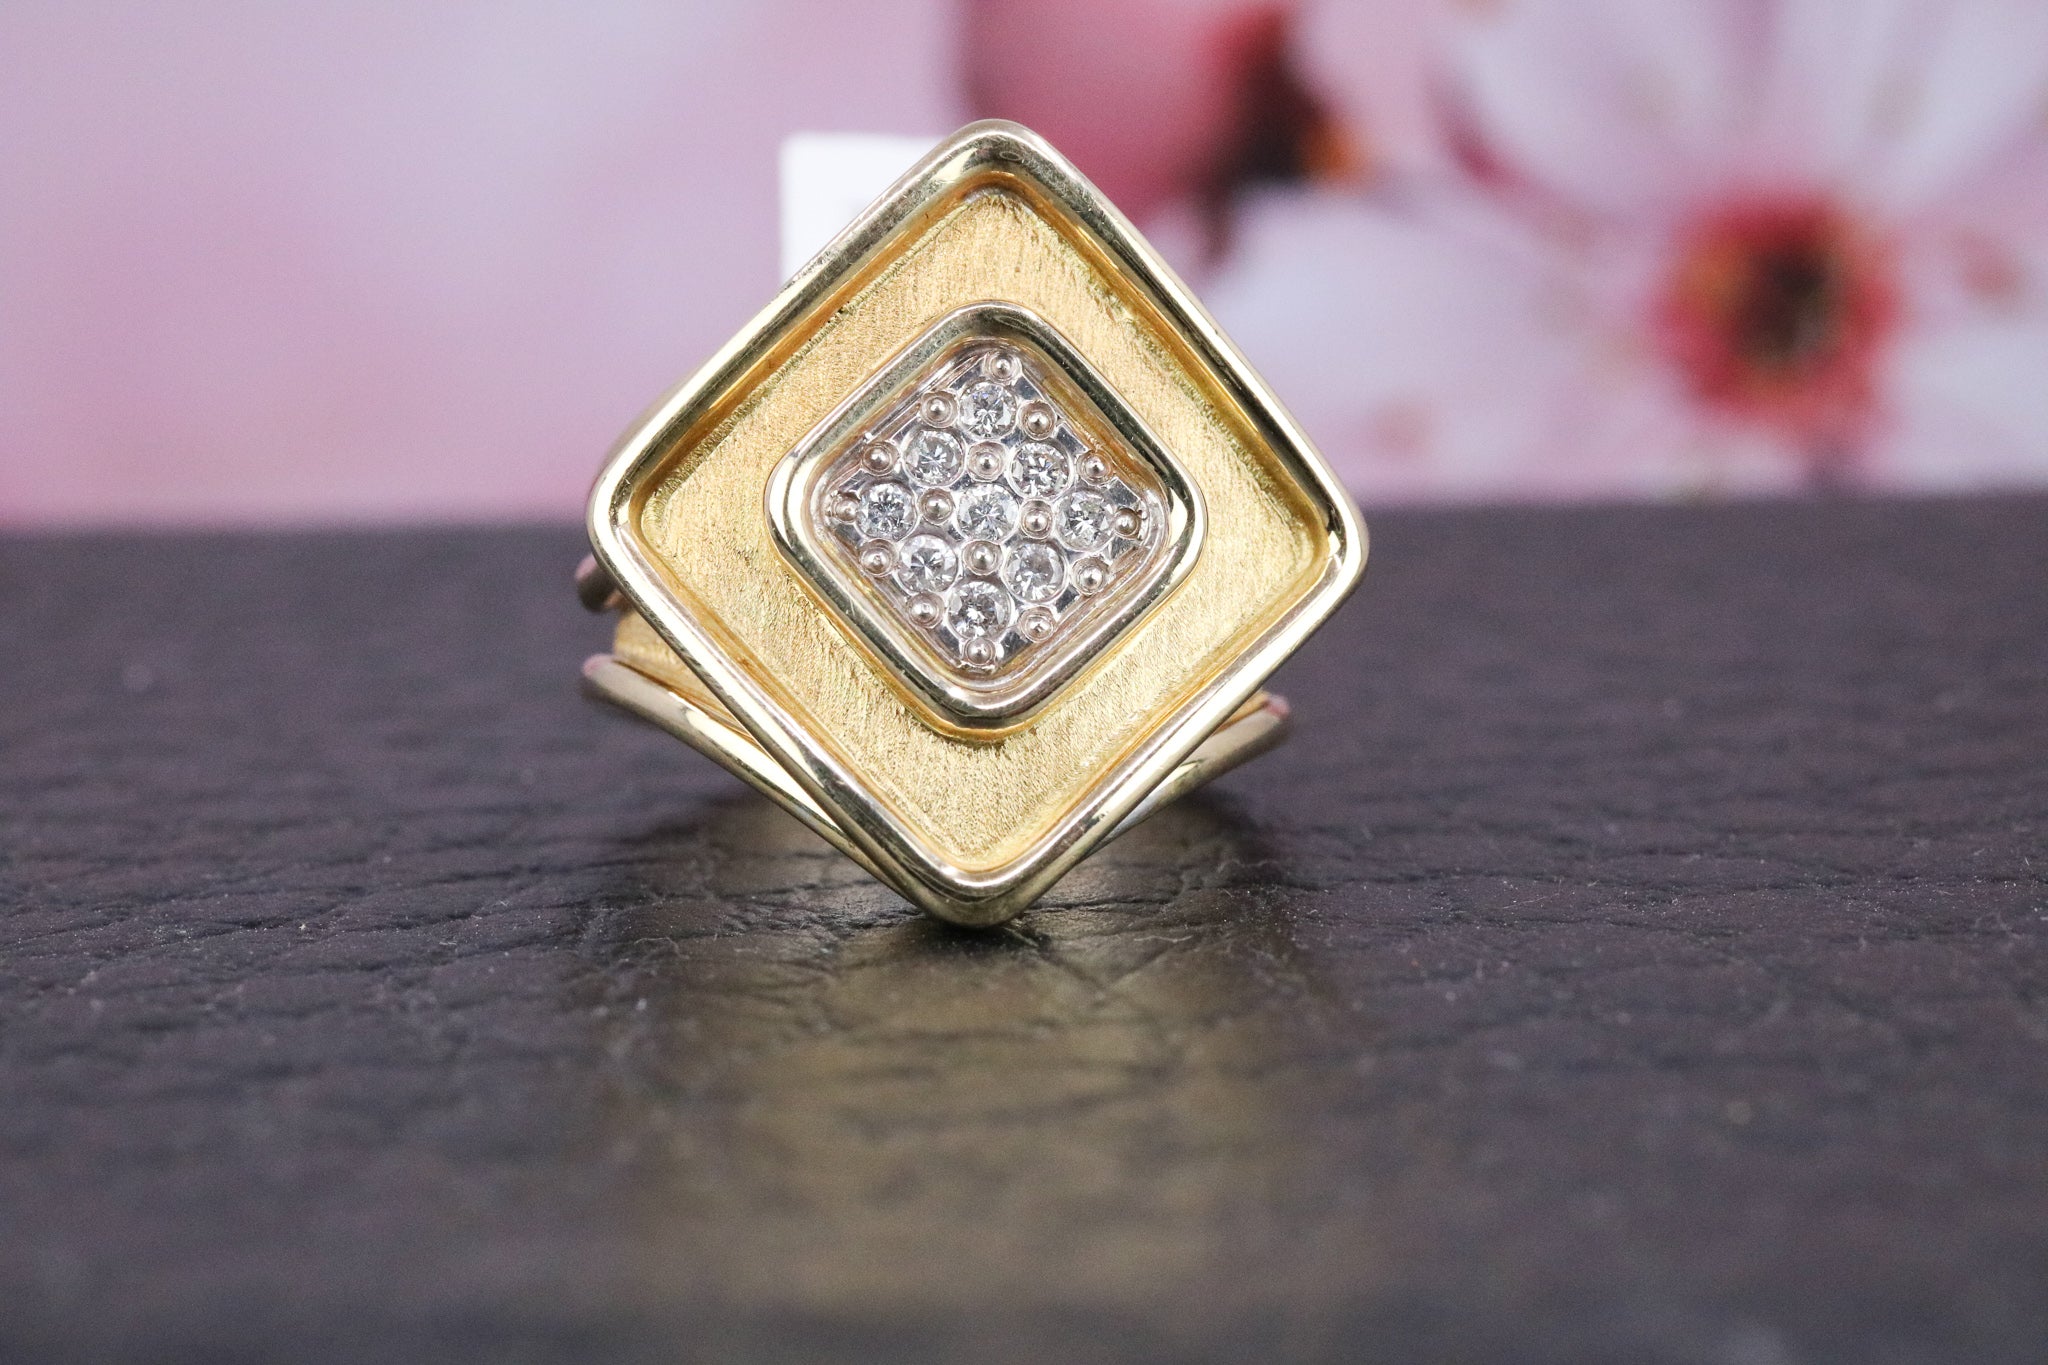 14ct Yellow Gold Diamond Ring - HJ2240 - Hallmark Jewellers Formby & The Jewellers Bench Widnes